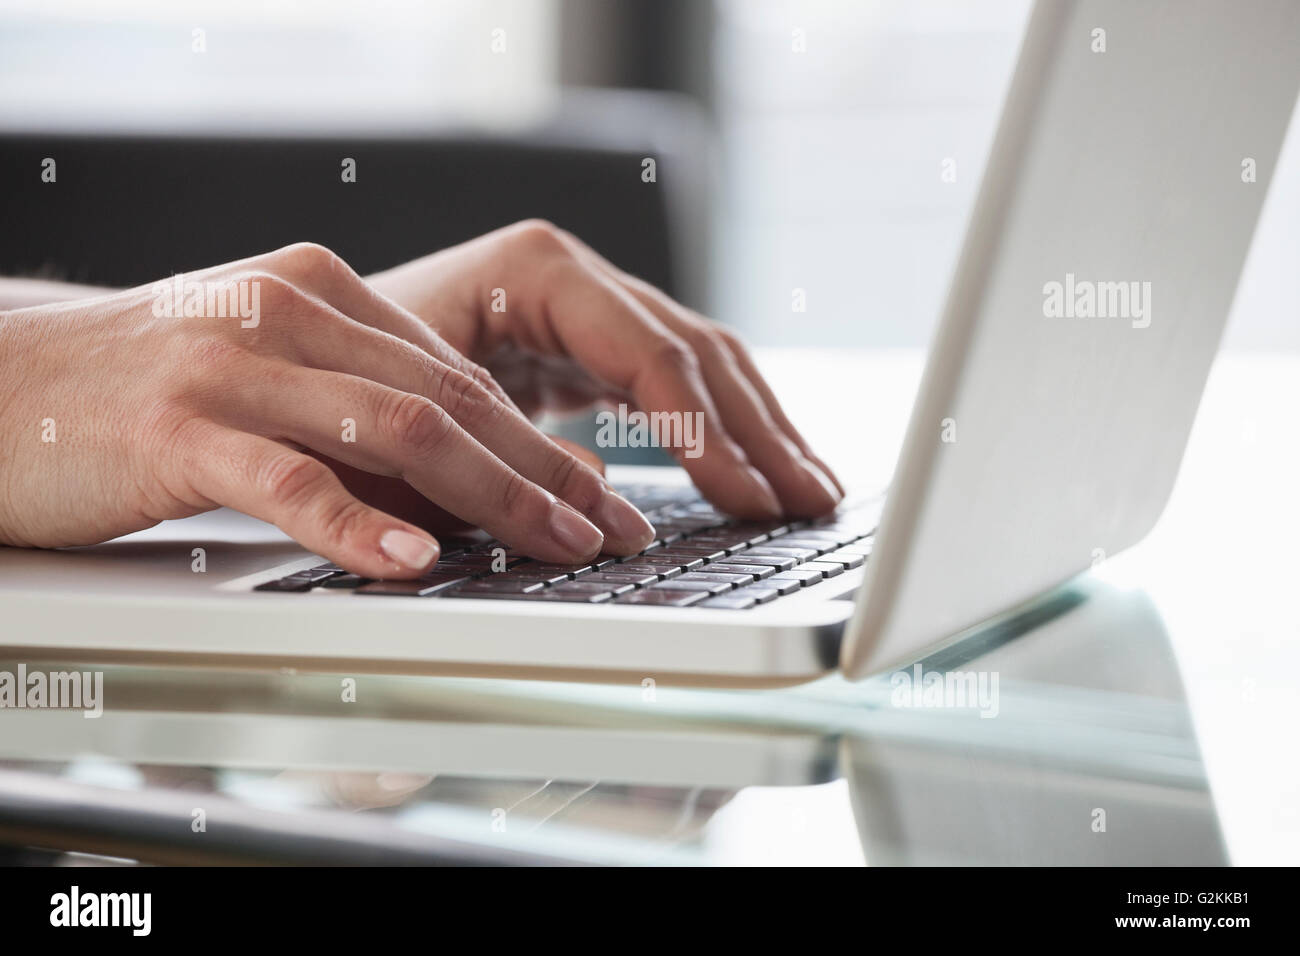 Close-up of woman's hands using laptop Stock Photo